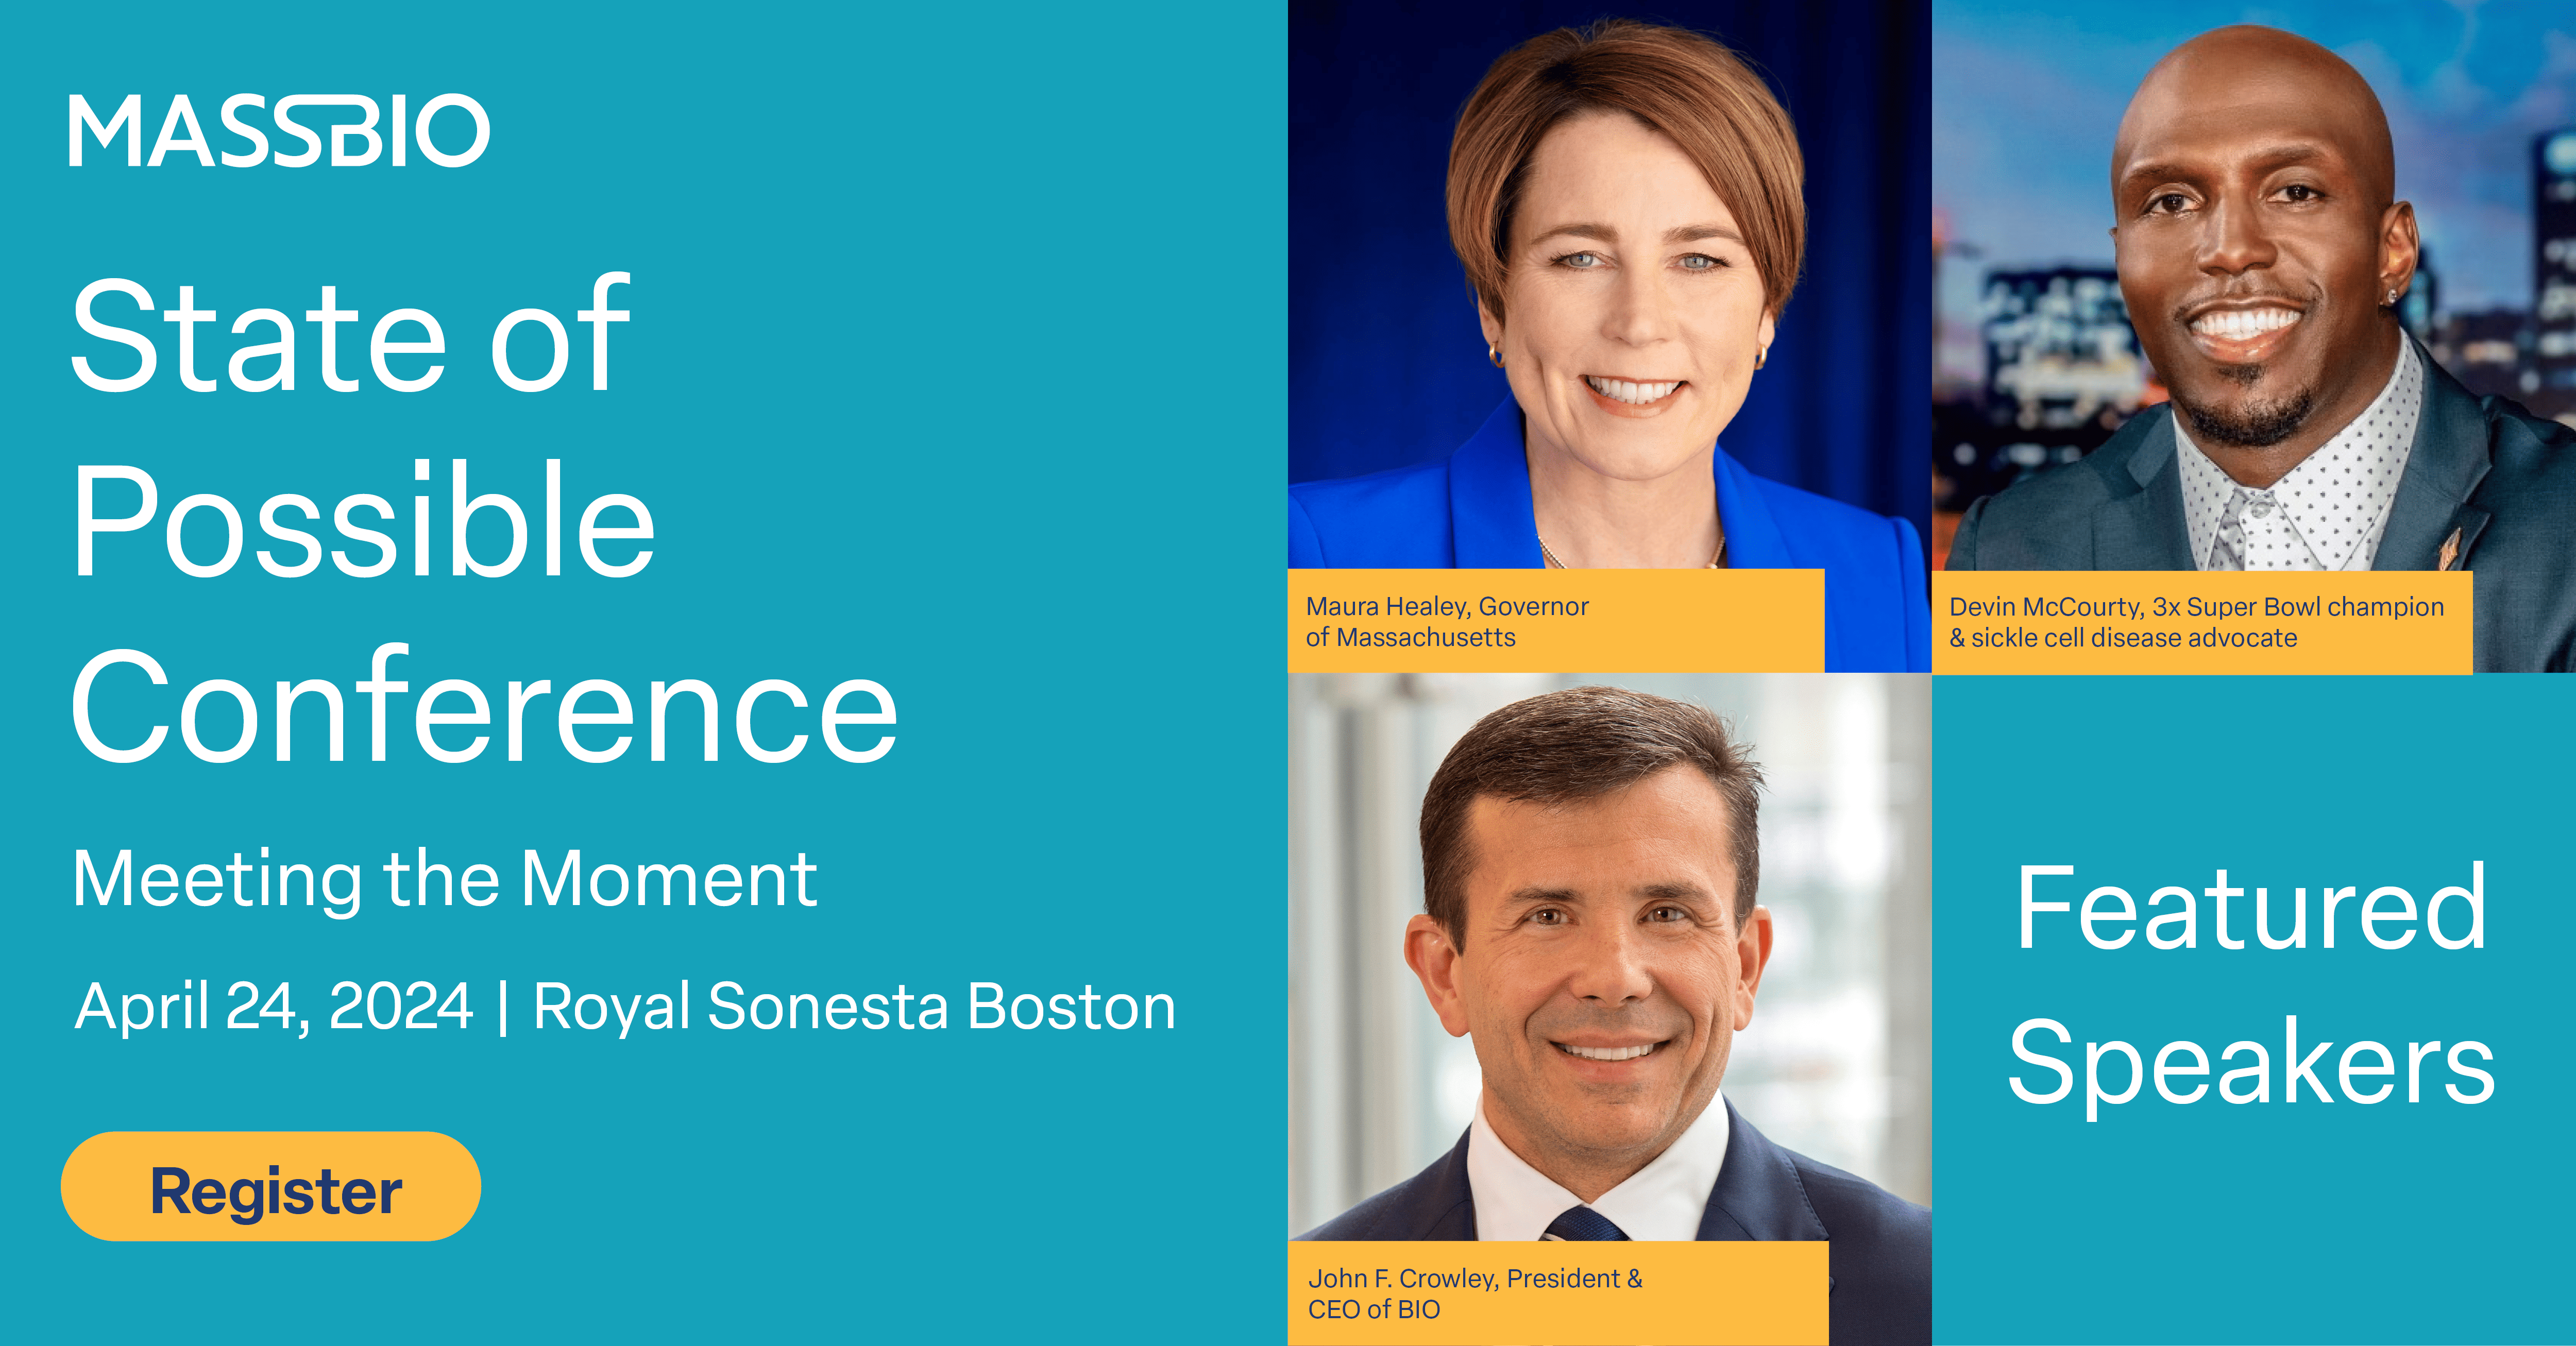 Blue graphic with the text State of Possible Conference, Meeting the Moment, April 24, 2024, Royal Sonesta Boston with photos of Governor Maura Healey, Devin McCourty, and John F. Crowley, who are designated as Featured Speakers.